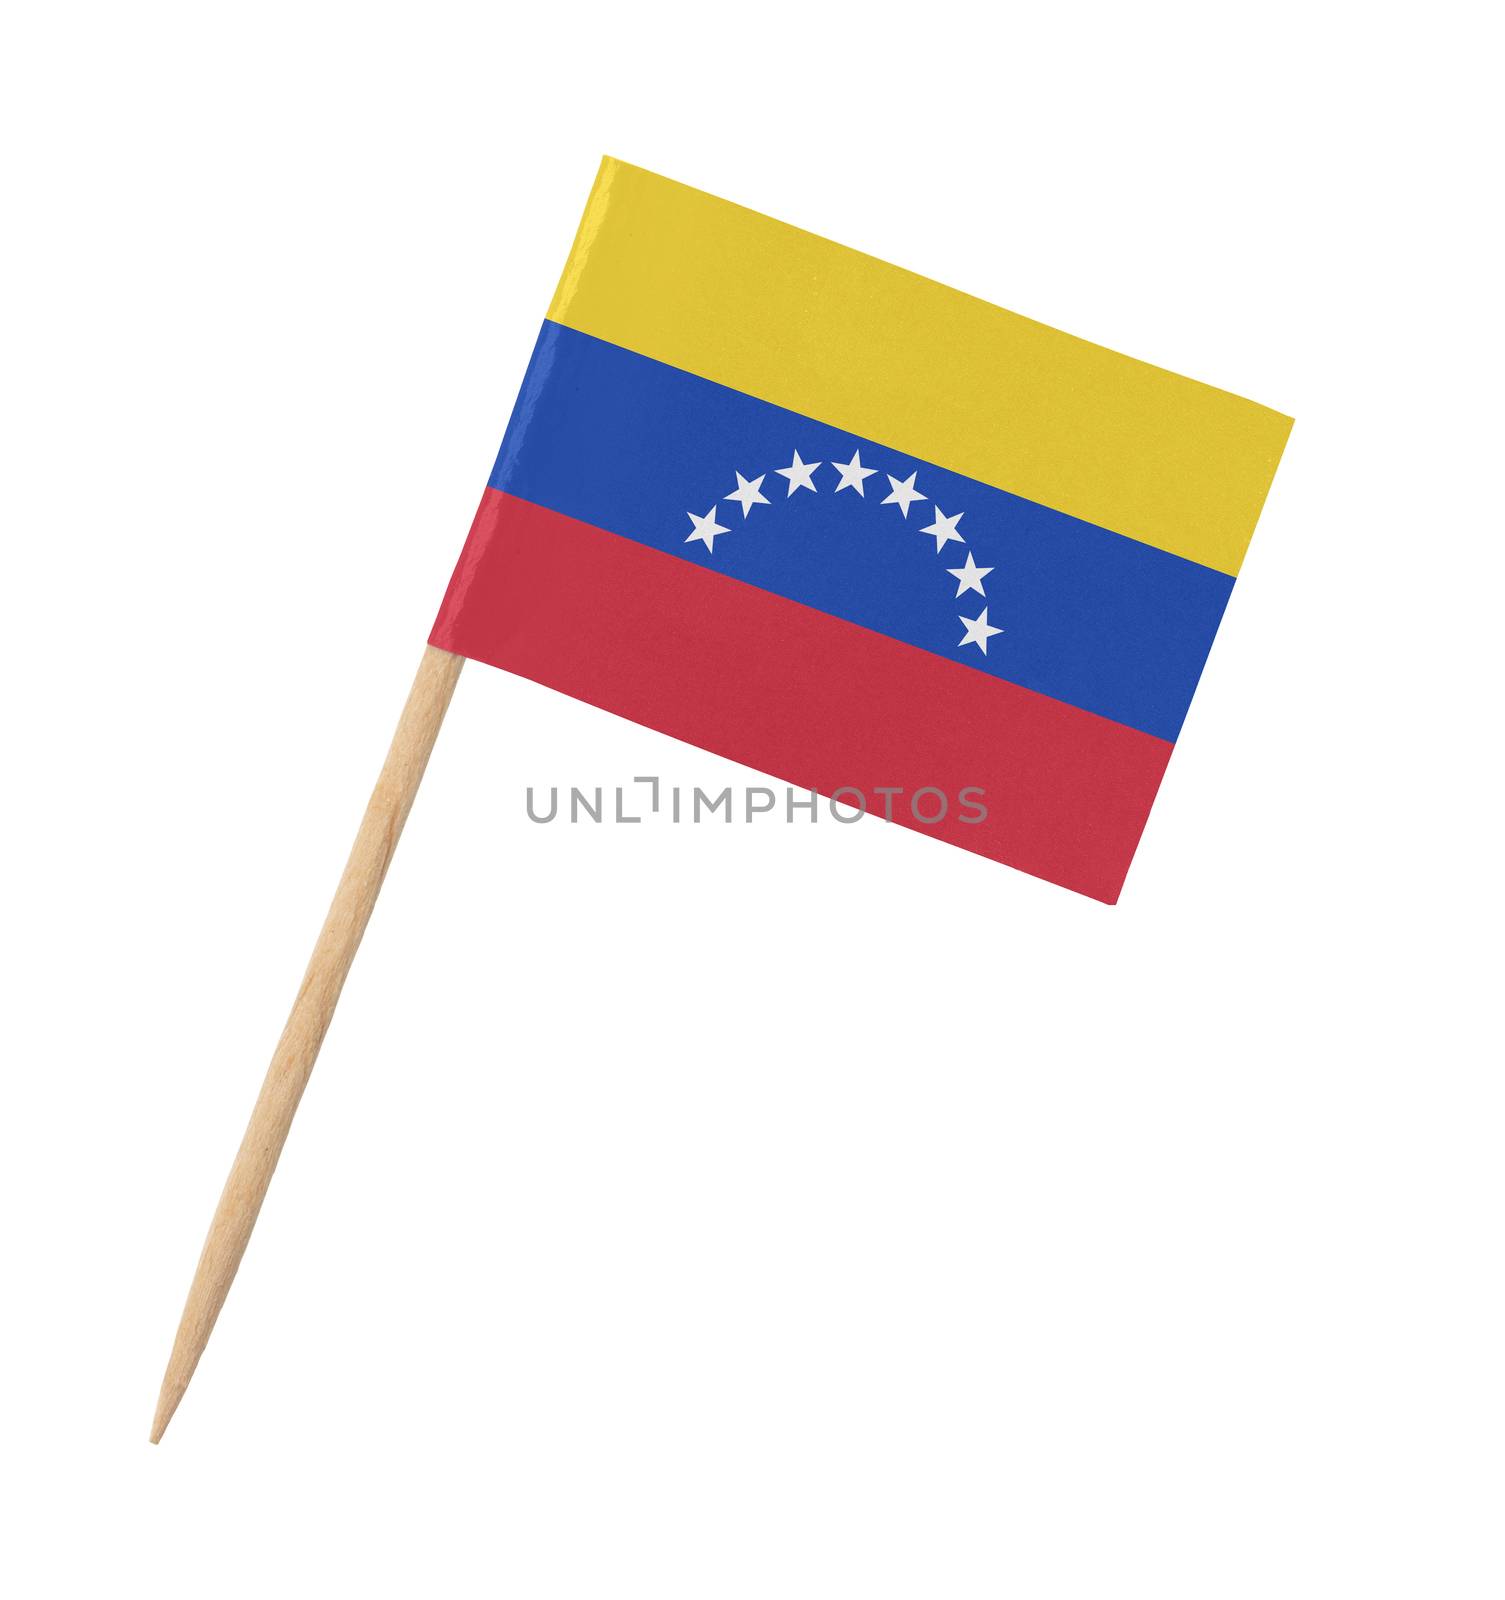 Small paper Venezuelan flag on wooden stick, isolated on white